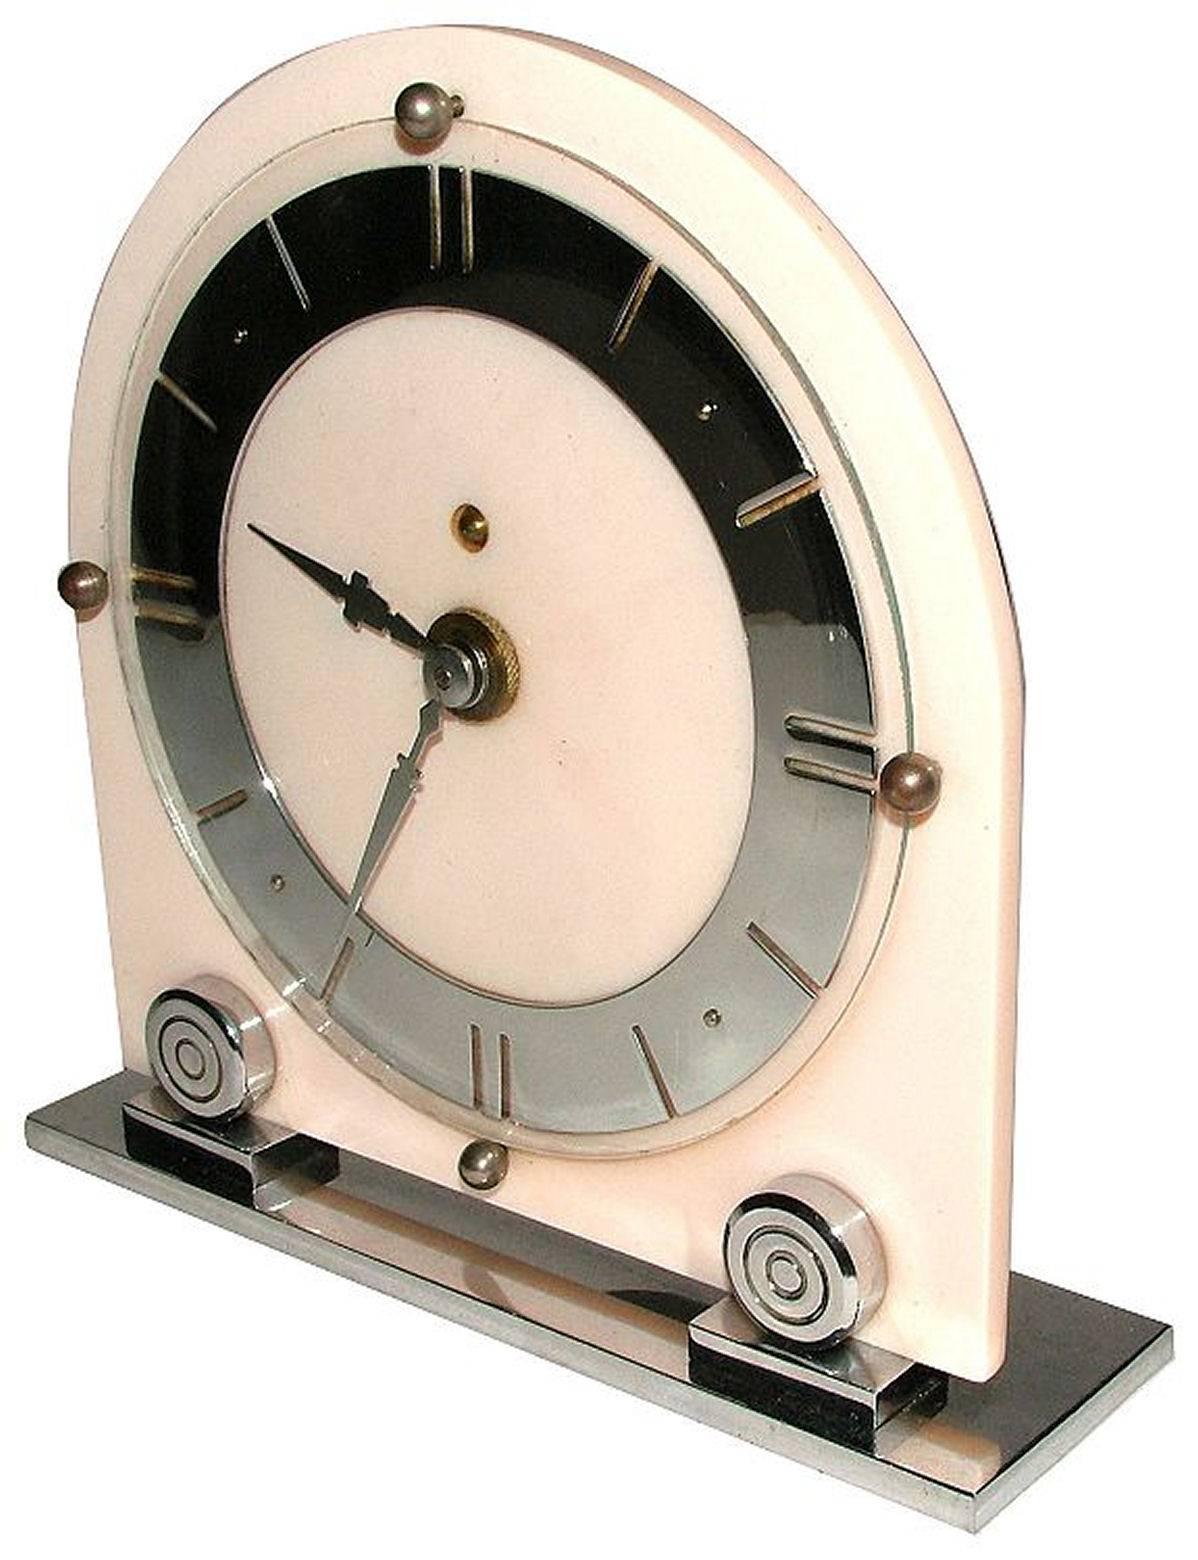 Stylish Art Deco mantel piece clock by LS Mayer in good working order. Modernist dial and stylised chrome detailing. Background is the palest of pinks in an early plastic and bakelite. Condition is excellent, the chrome is as bright as crisp as when